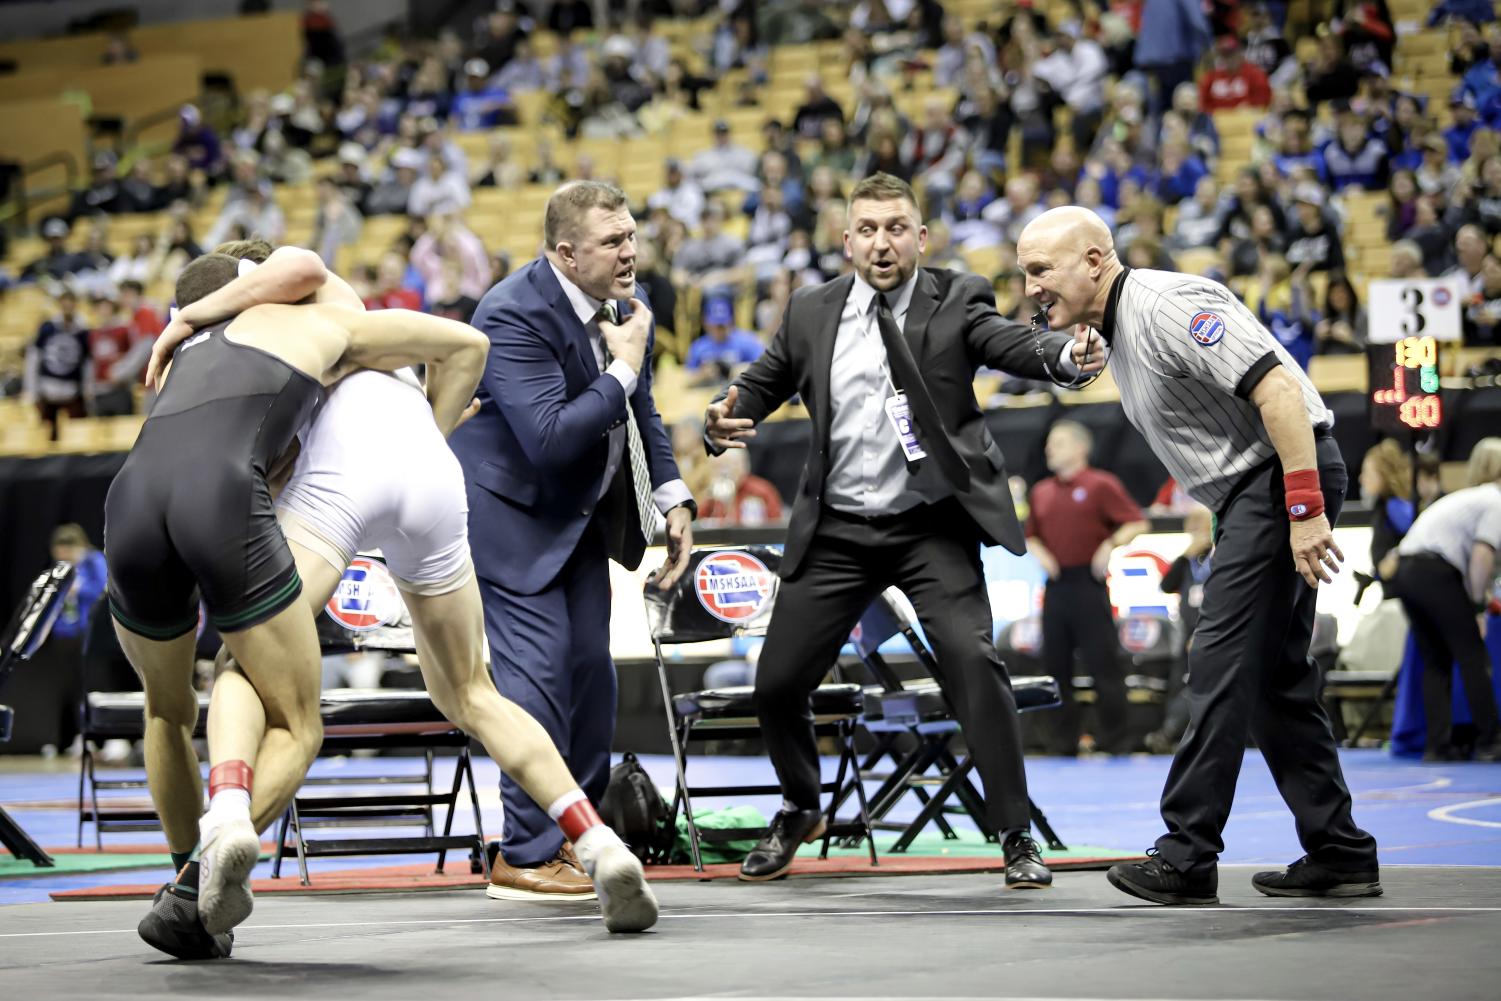 Alexander Hutchcraft (11) wrestles during the state finals. During the match many technical violations were not called leaving coaches angry. “Wrestling really defines who I am today. It’s physically built me and mentally pushes you,” said Hutchcraft. 